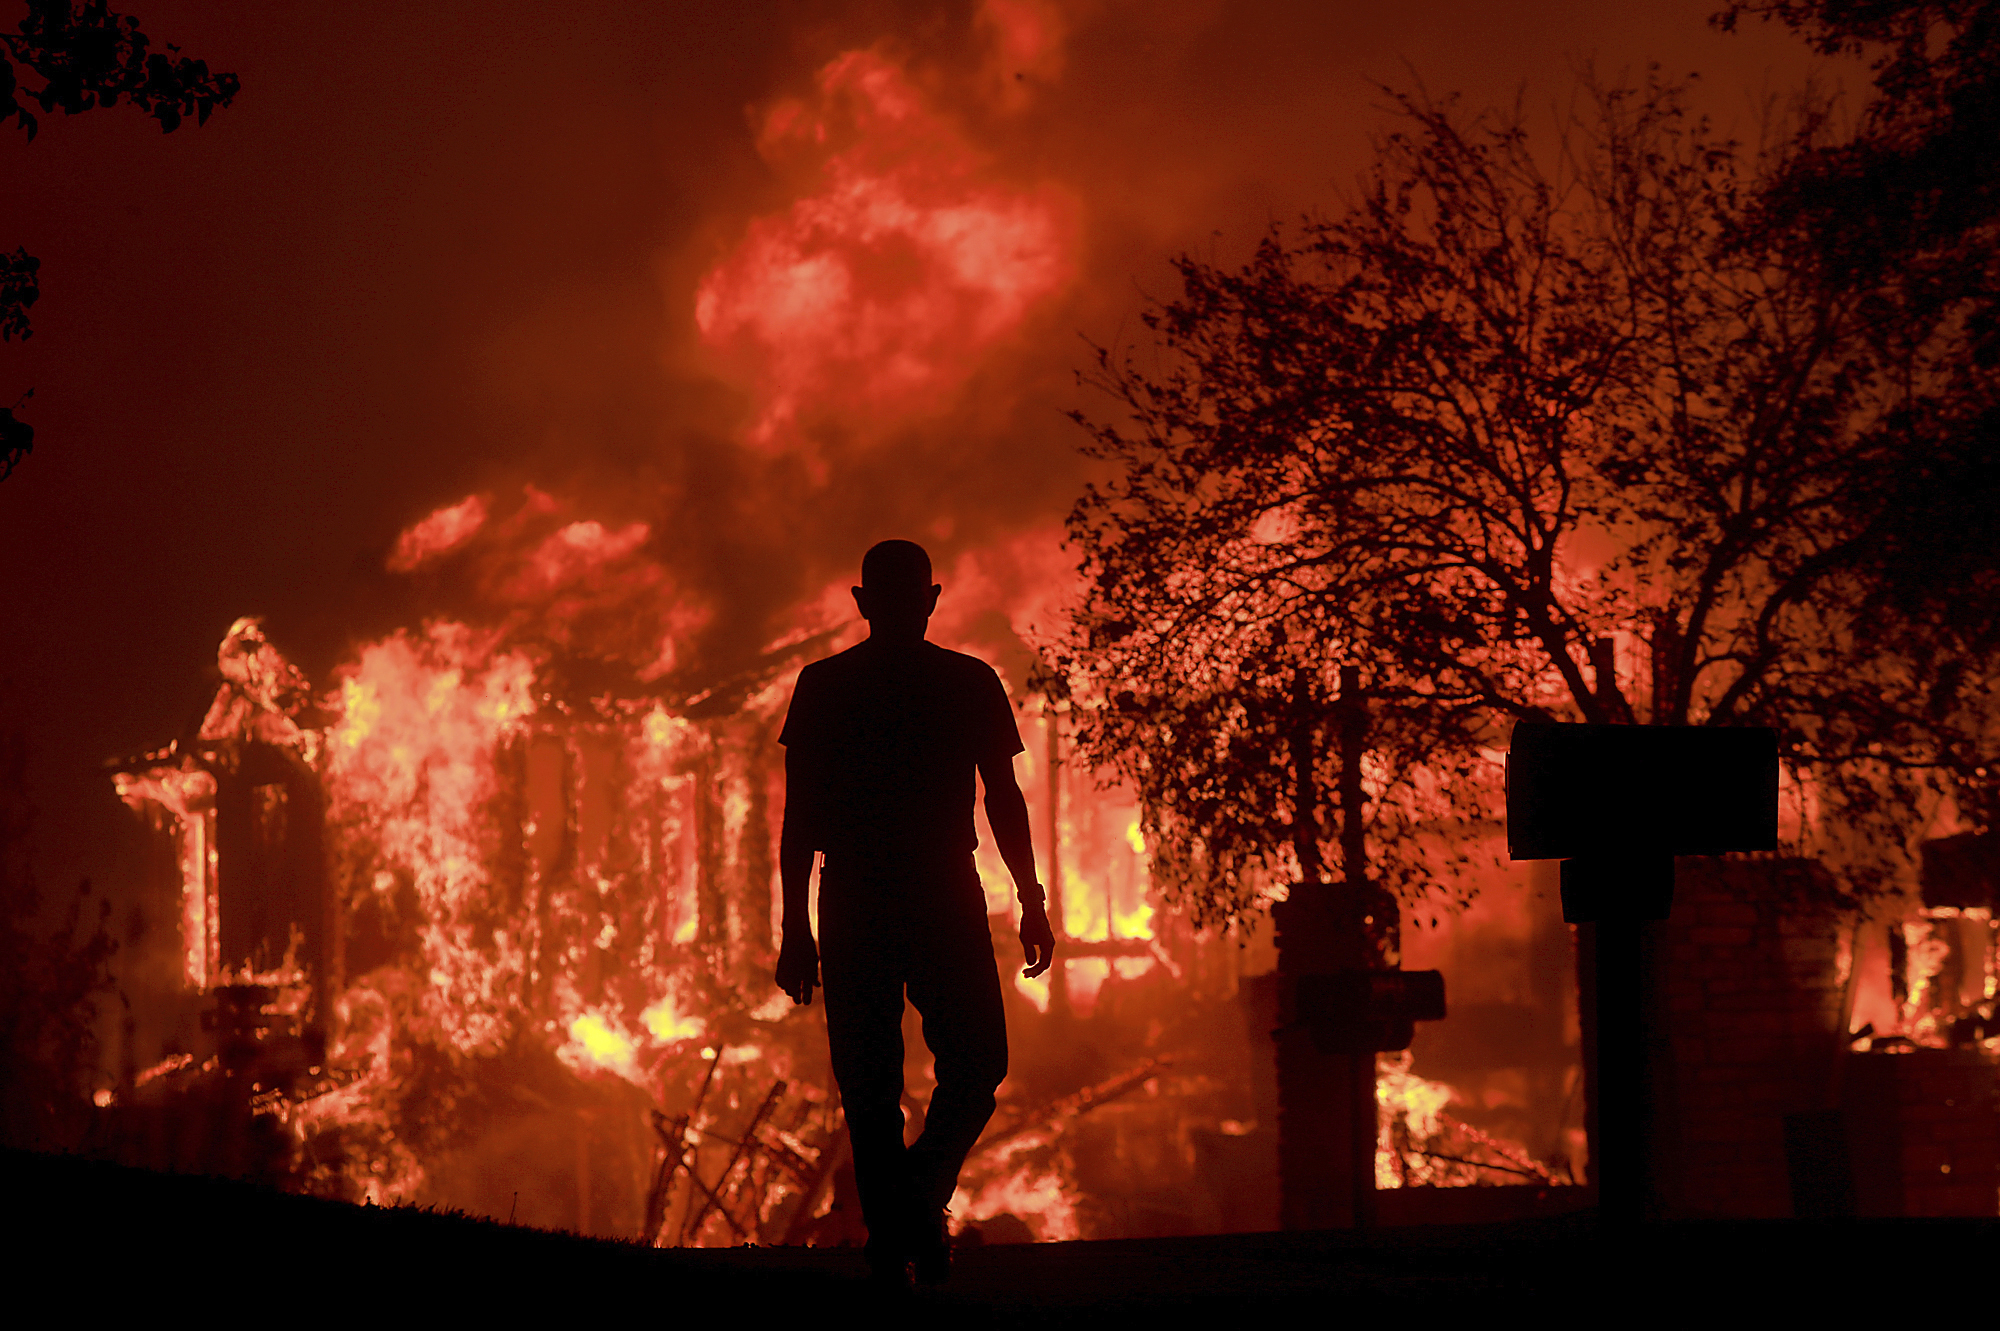 PHOTO: Jim Stites watches part of his neighborhood burn in Fountaingrove, Calif. on Oct. 9, 2017. More than a dozen wildfires have destroyed at least 1,500 homes and businesses and sent thousands of people fleeing.